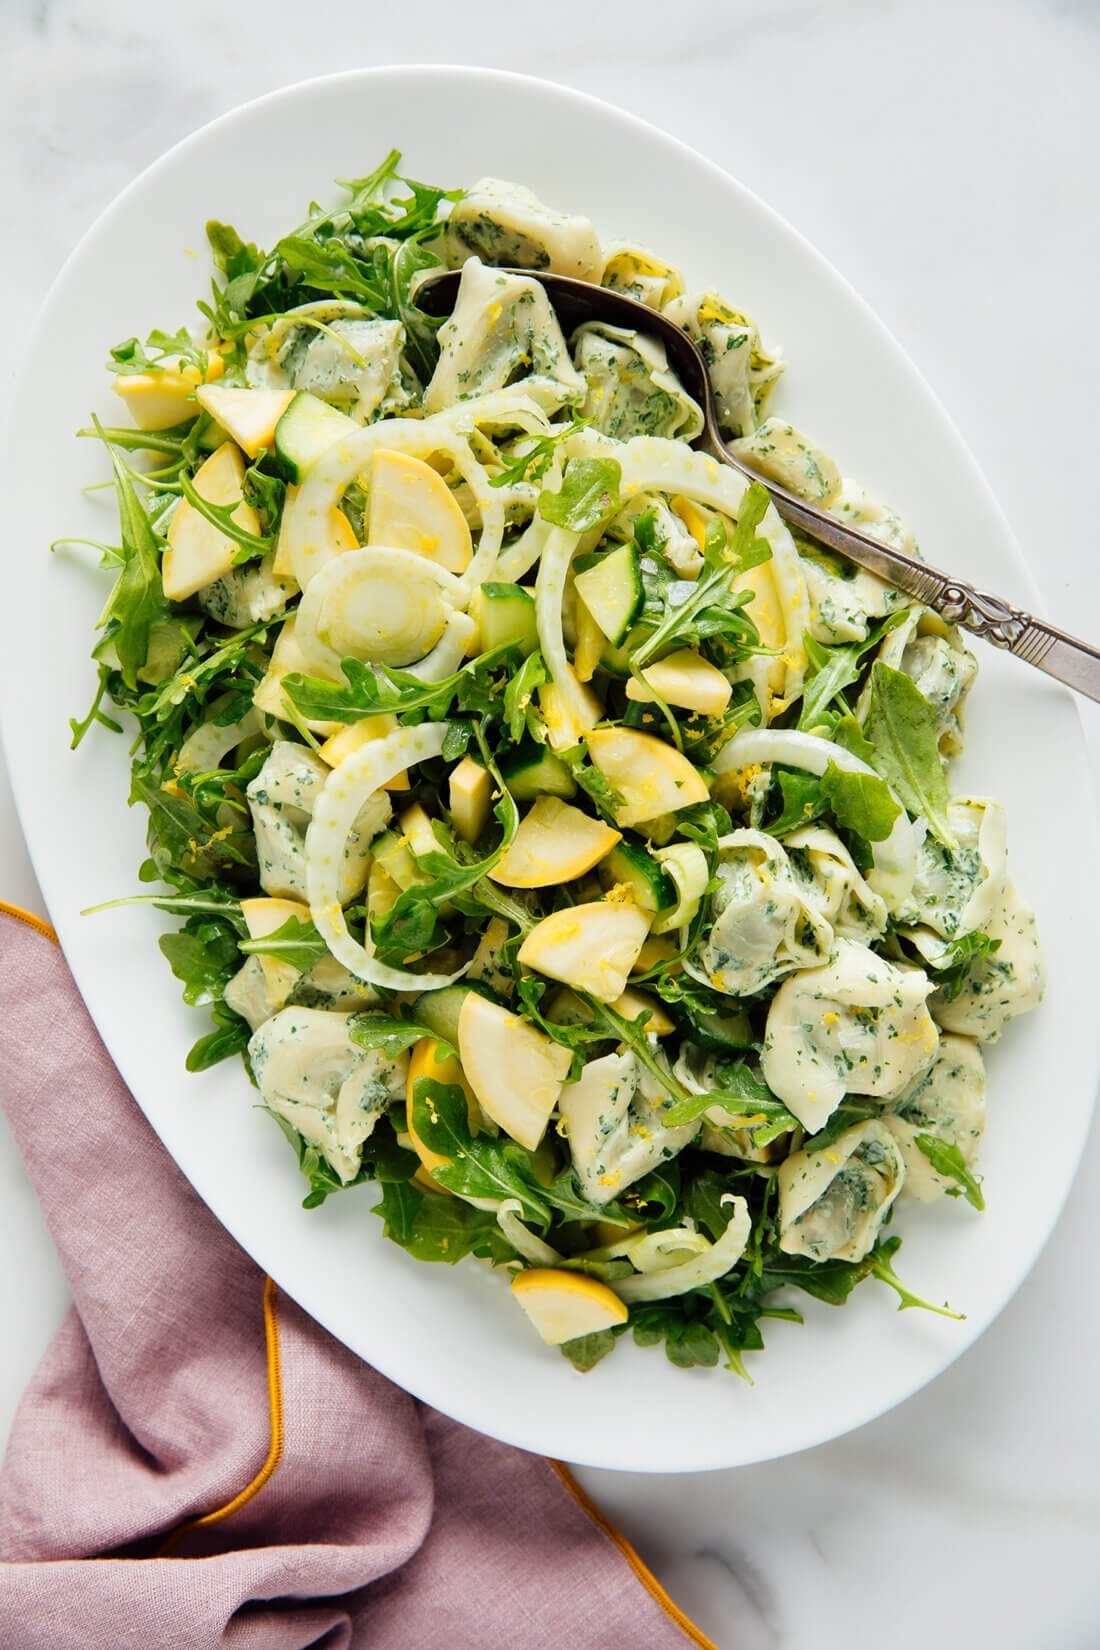 Plated tortellini salad topped with summer squash and fennel